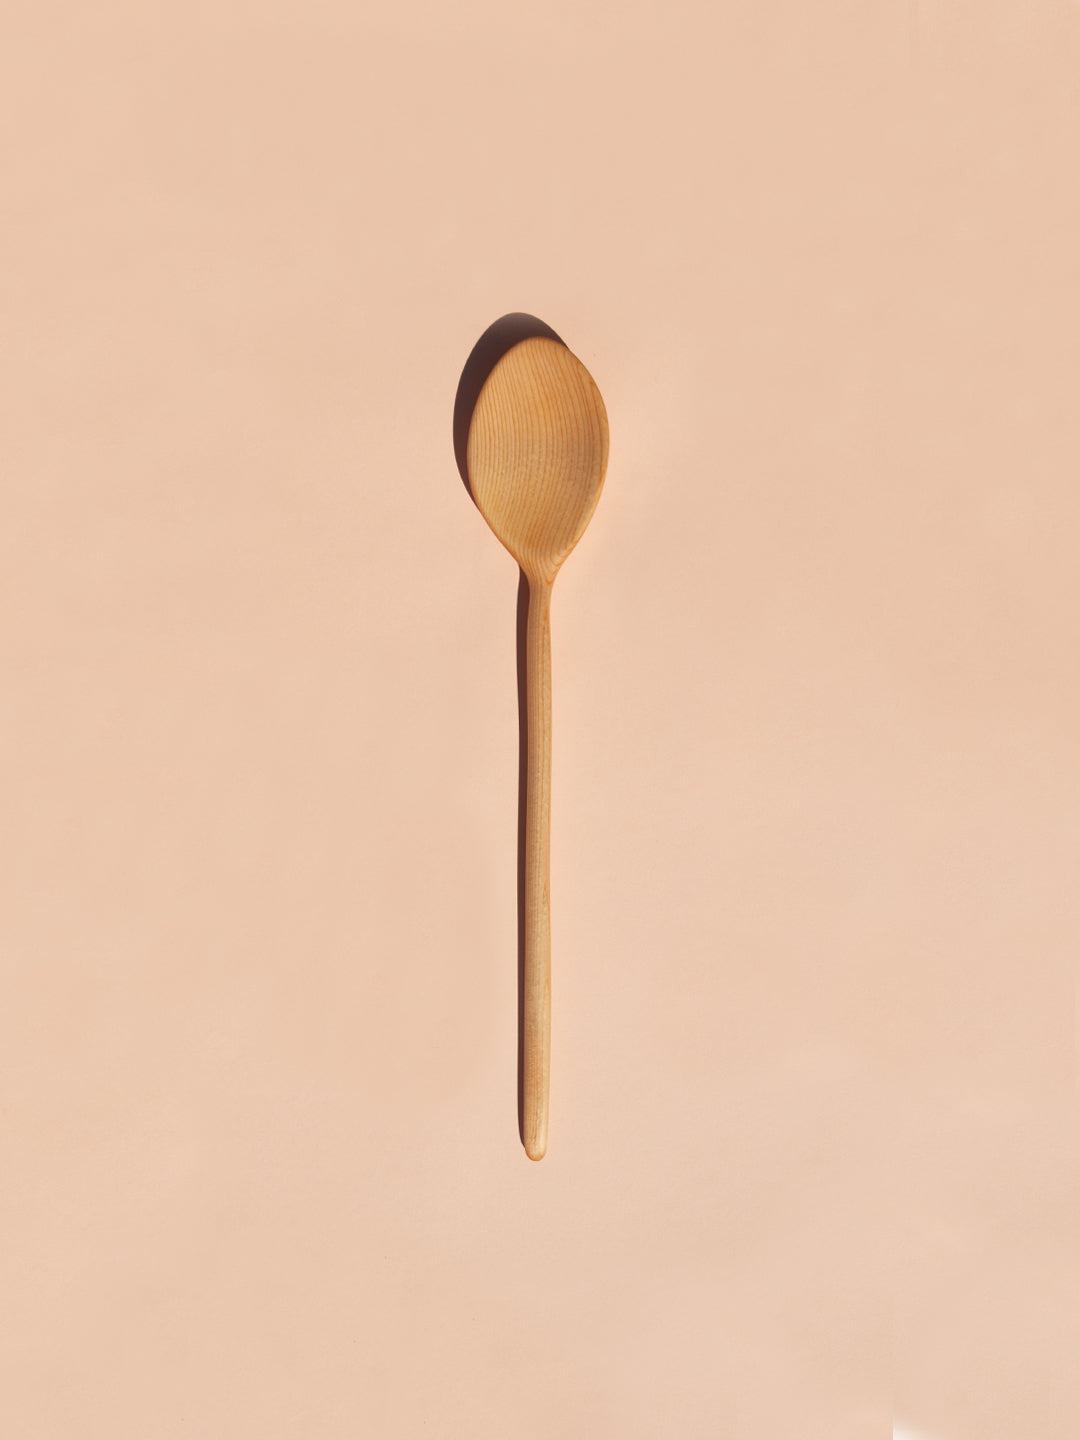 Hand Carved Wood Spoons - Suna